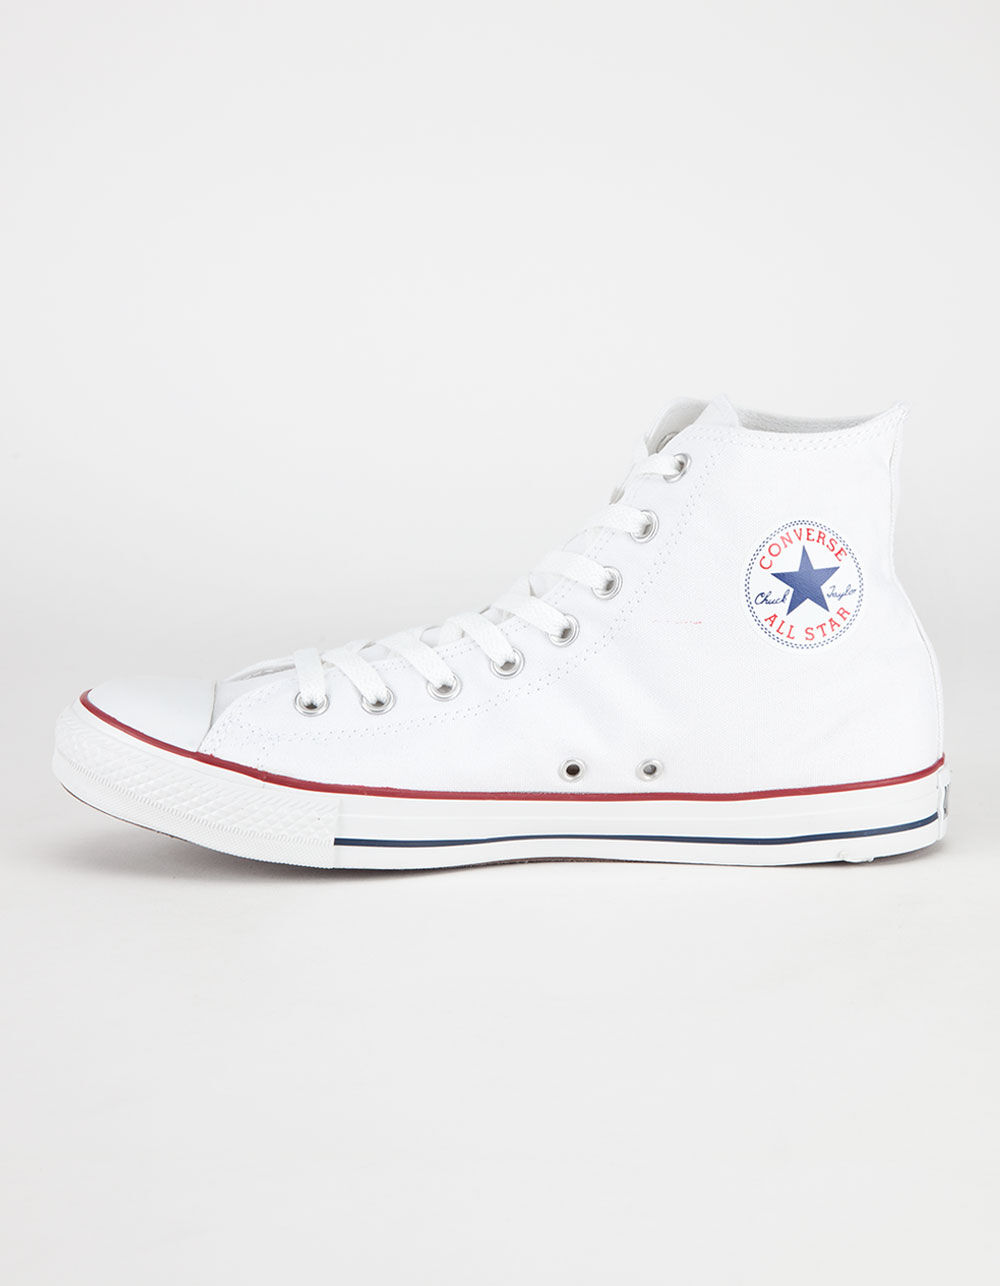 Ontslag Philadelphia spons CONVERSE Chuck Taylor All Star White High Top Shoes - WHITE | Tillys